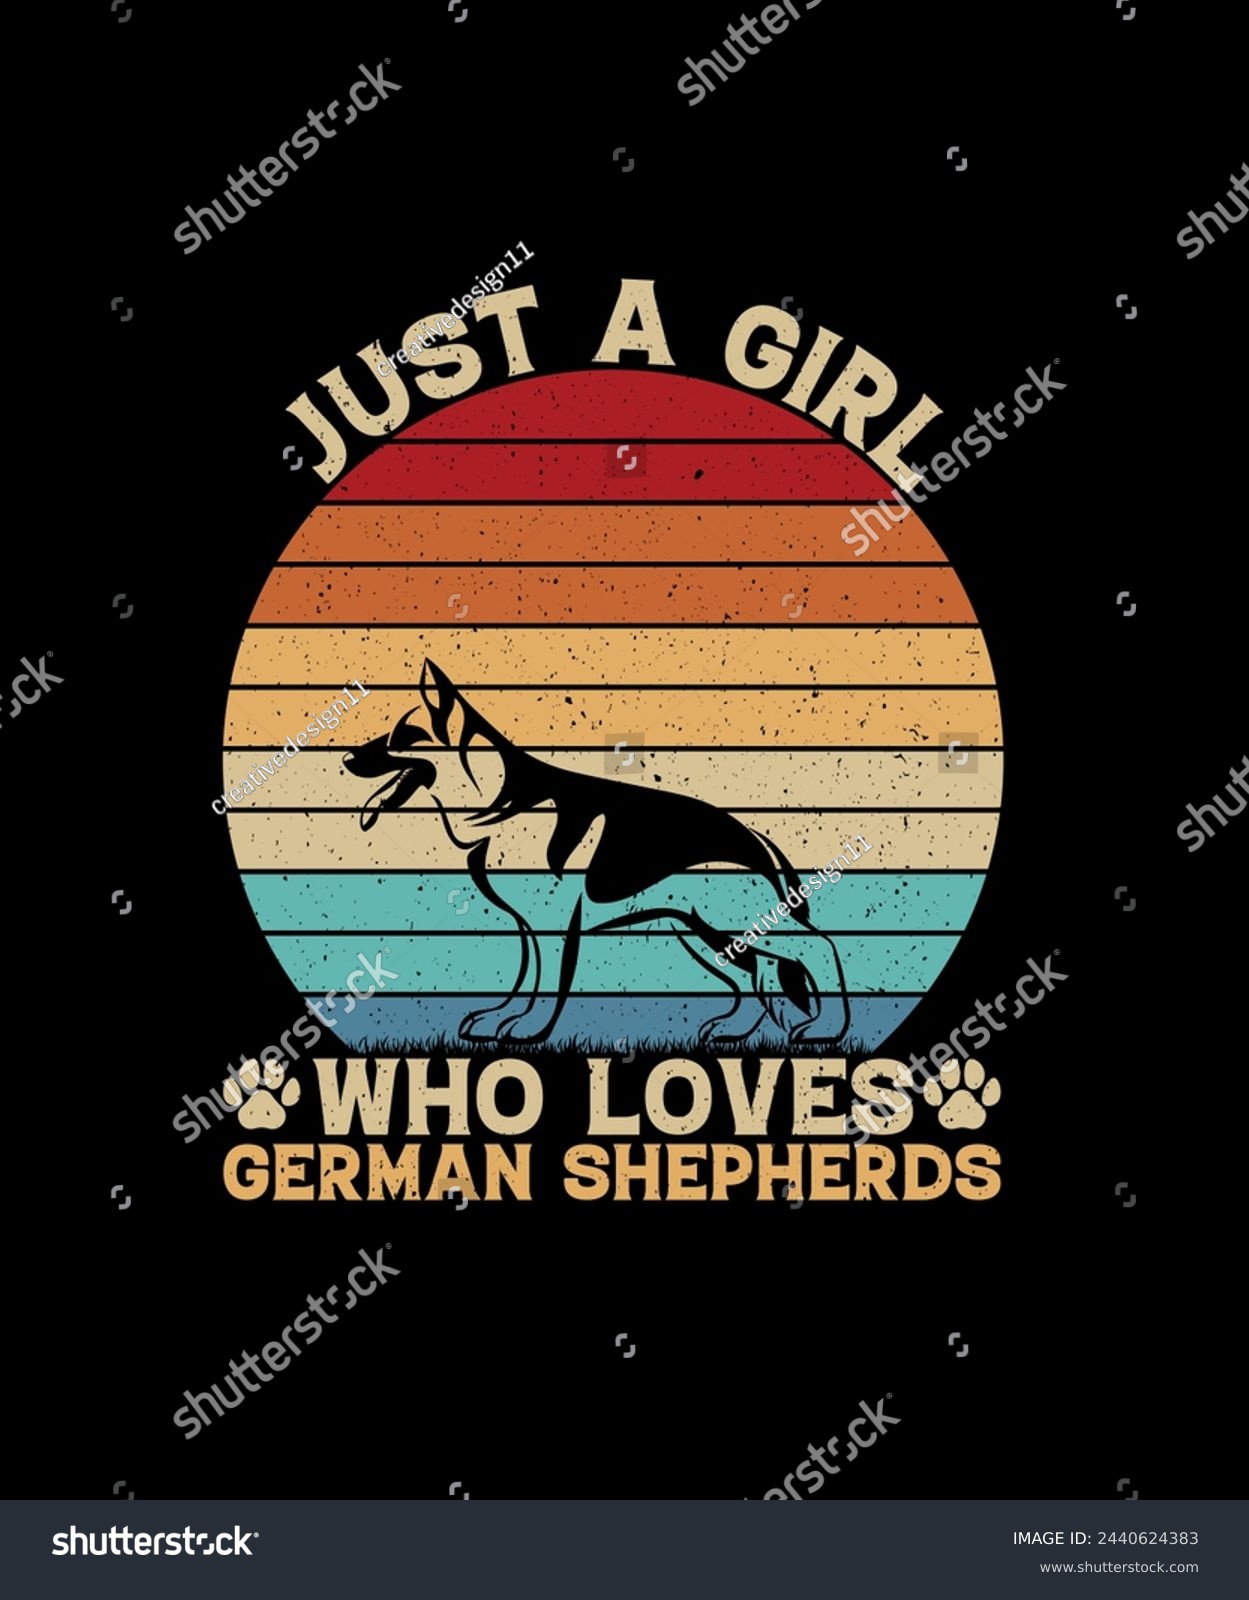 SVG of just a girl who loves german shepherds svg